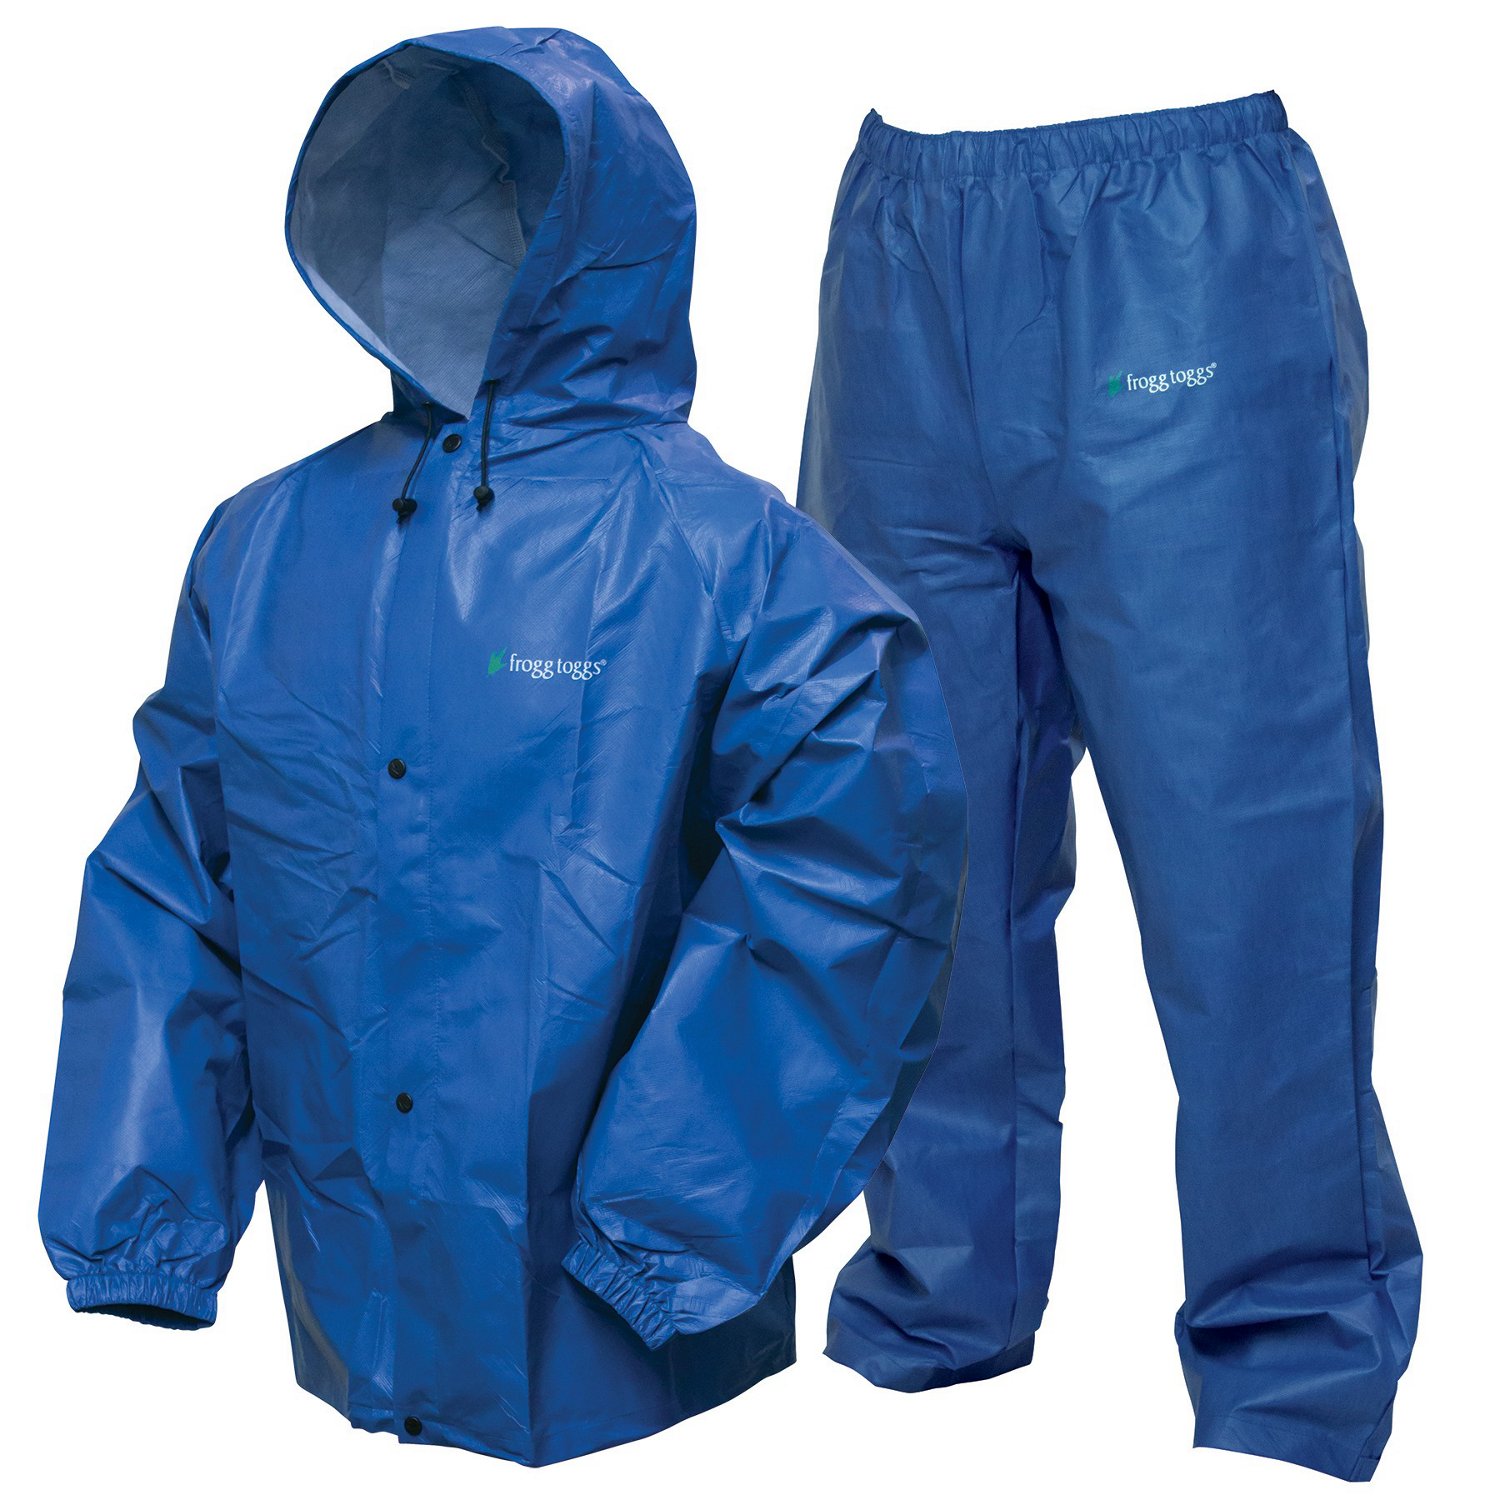 Frogg Toggs Men's Pro Lite Rain Suit | Free Shipping at Academy